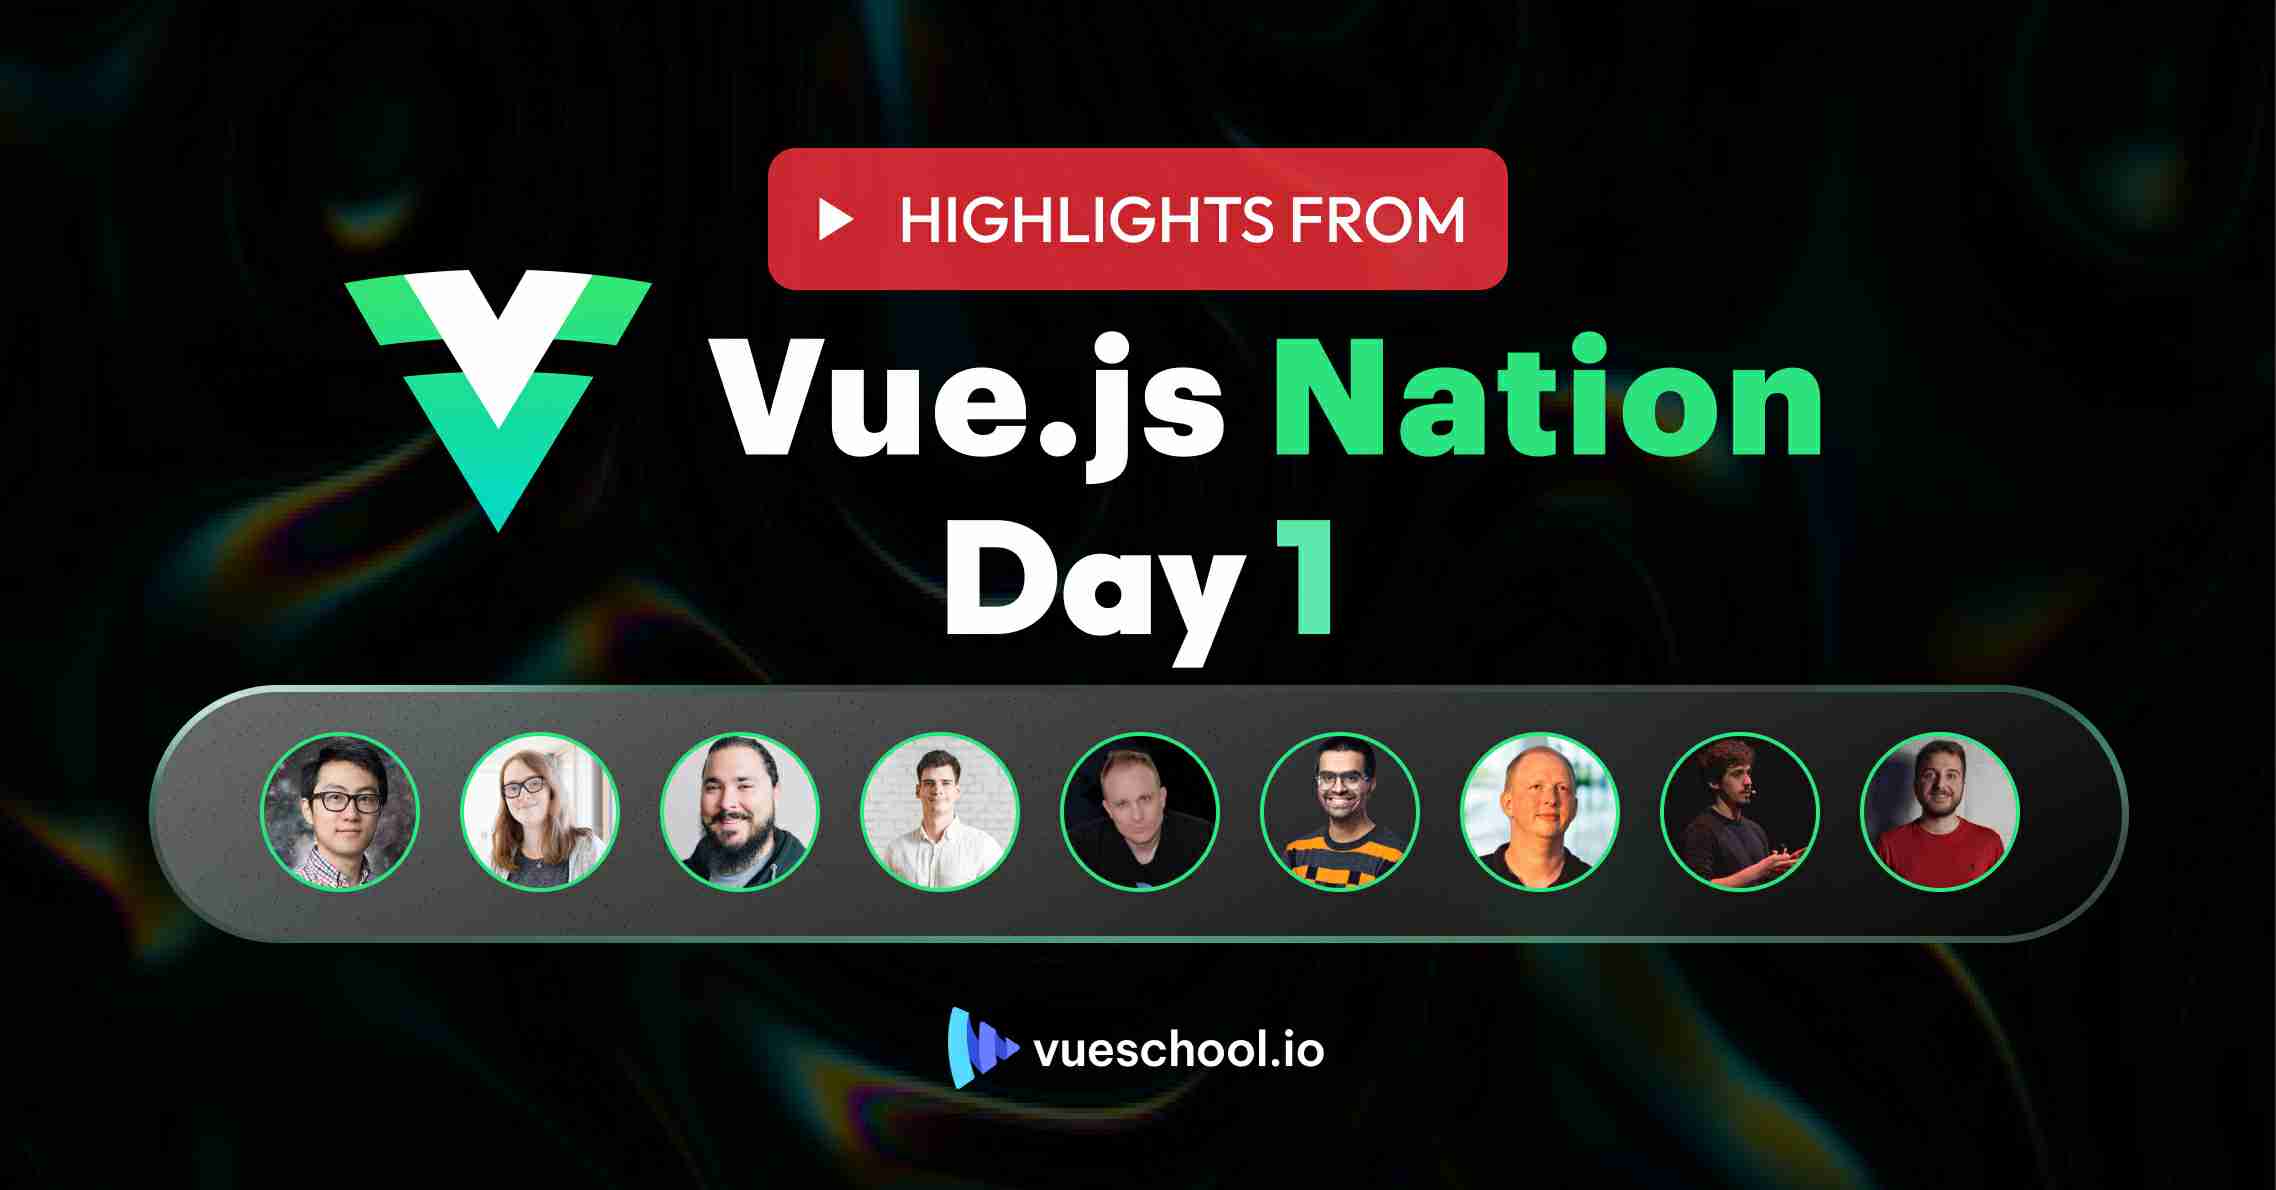 Highlights from Vue.js Nation Day 1